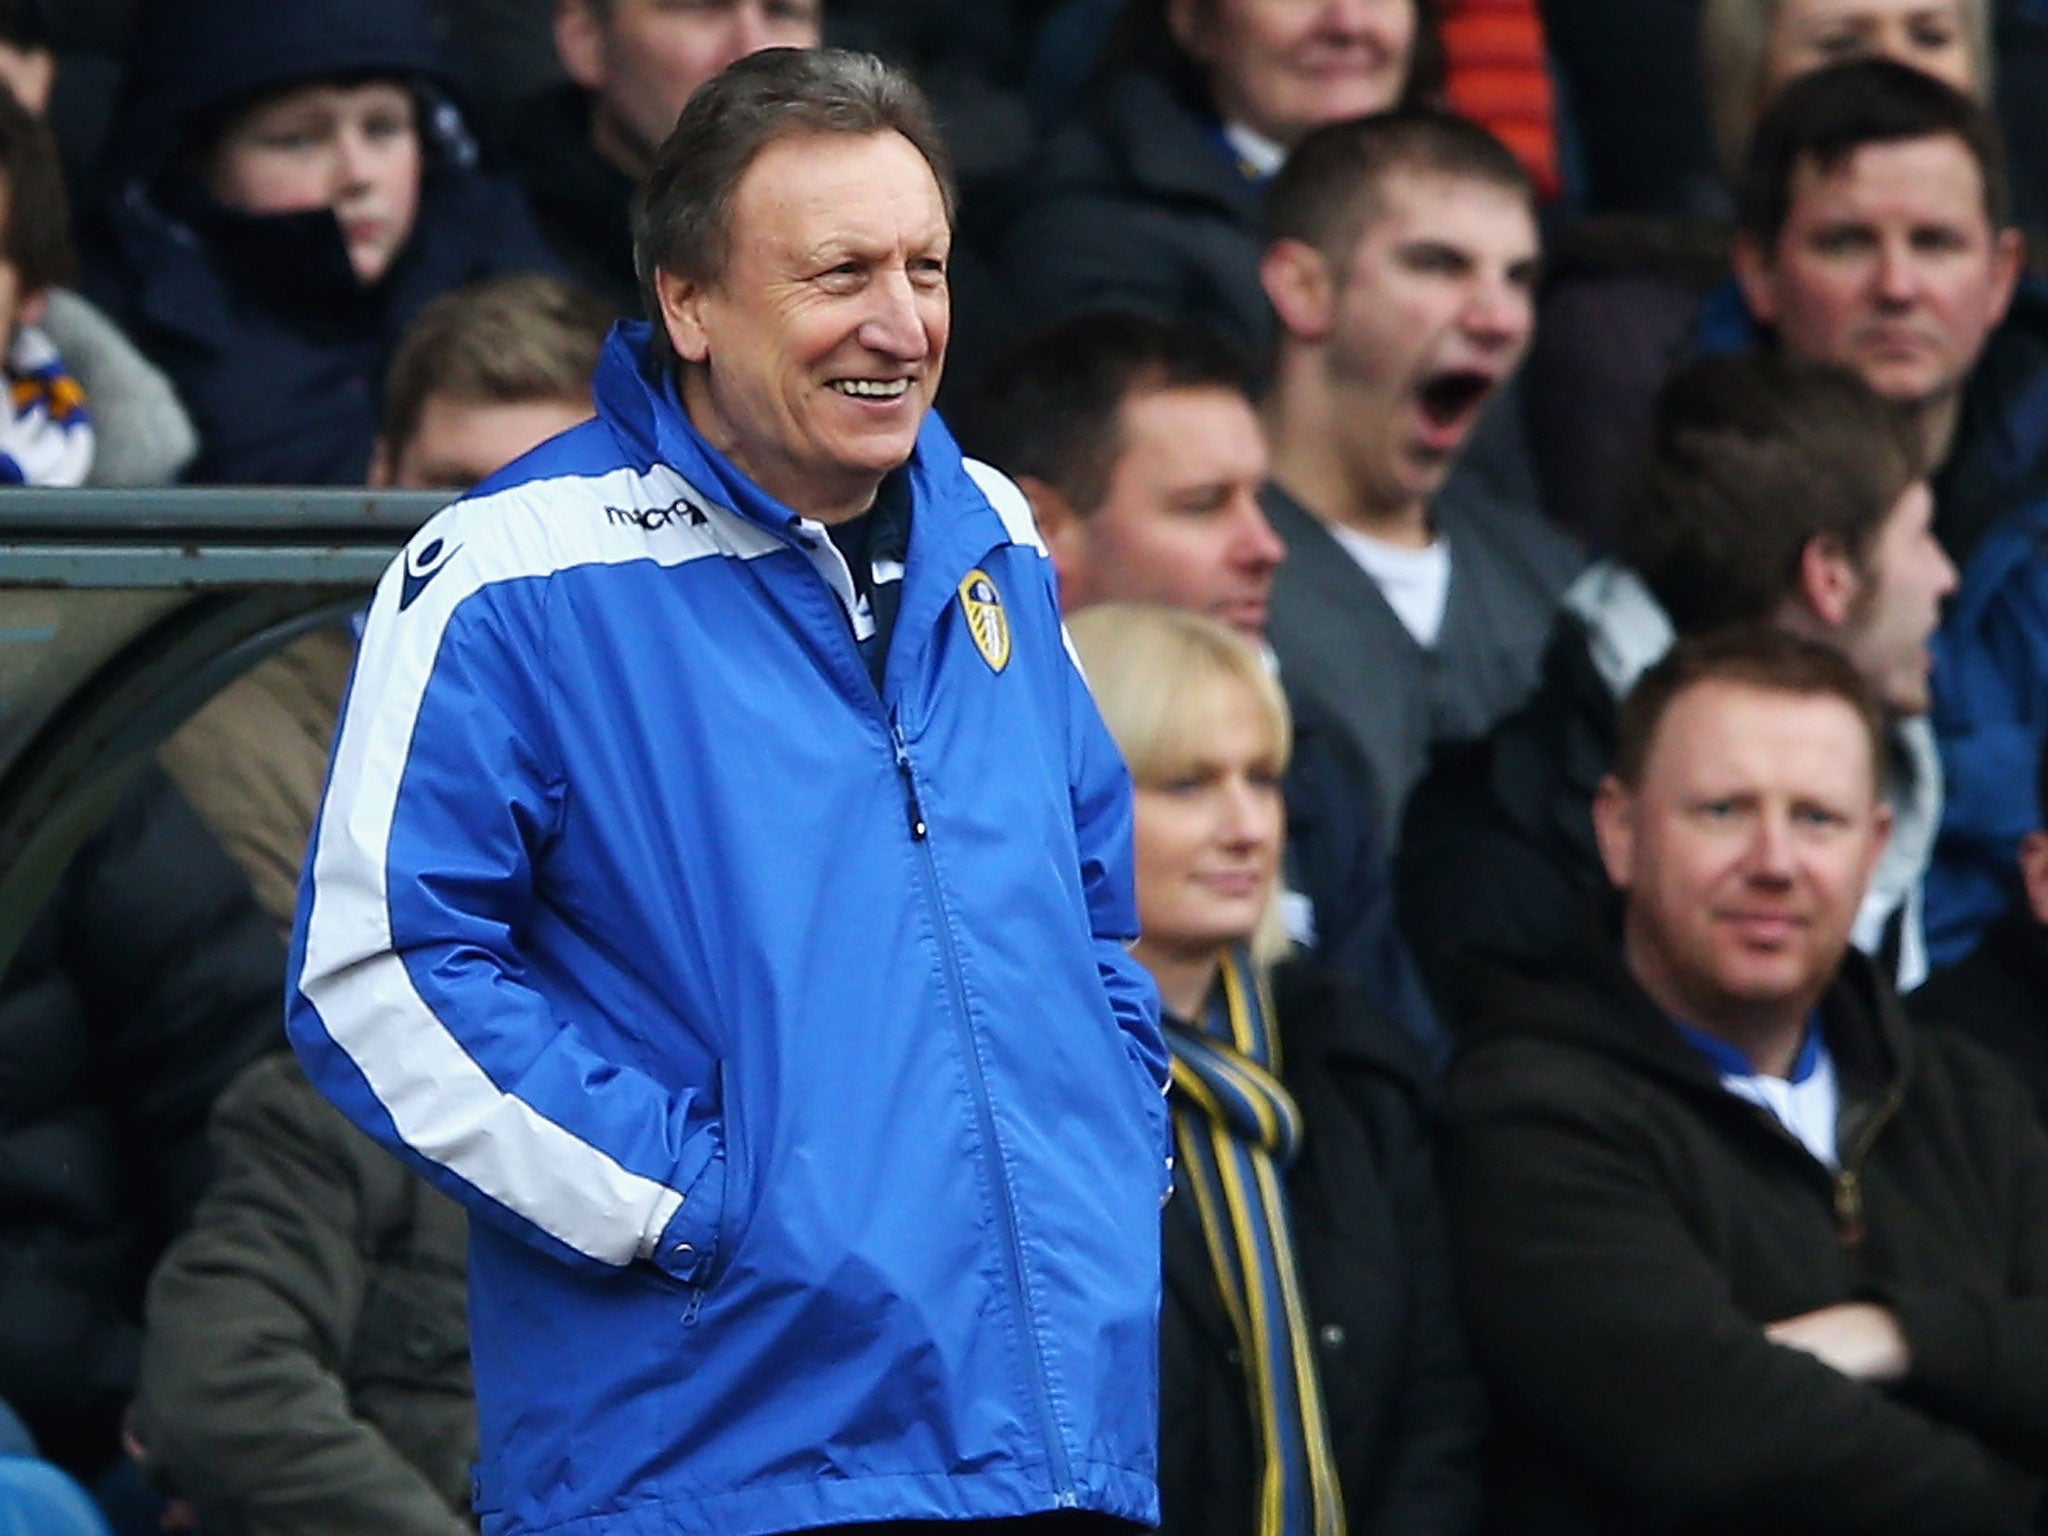 Neil Warnock once joked that he would take over Wednesday and try to get them relegated